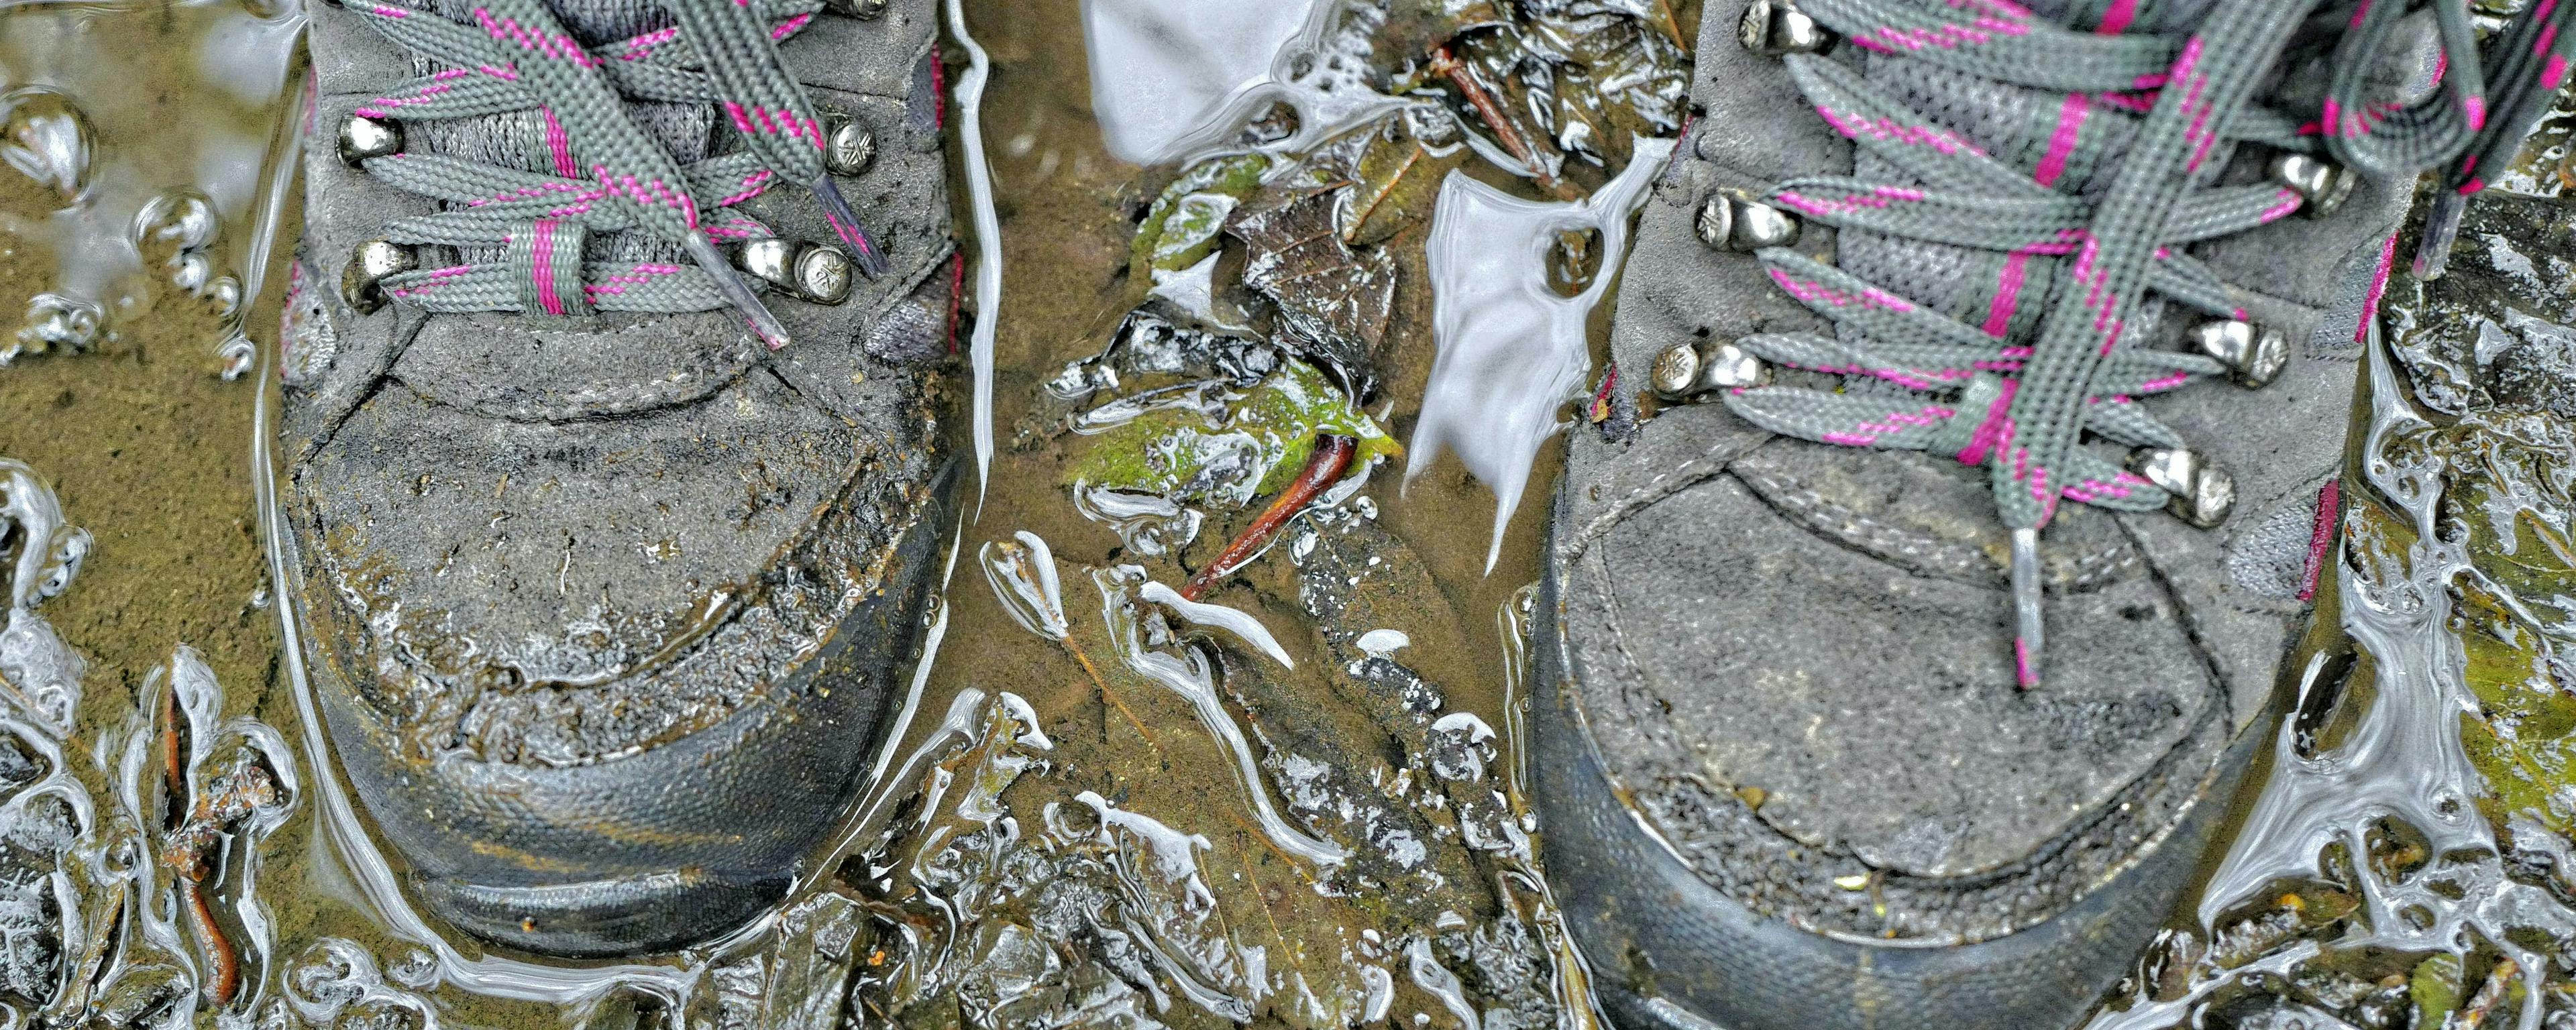 How to clean and waterproof hiking boots